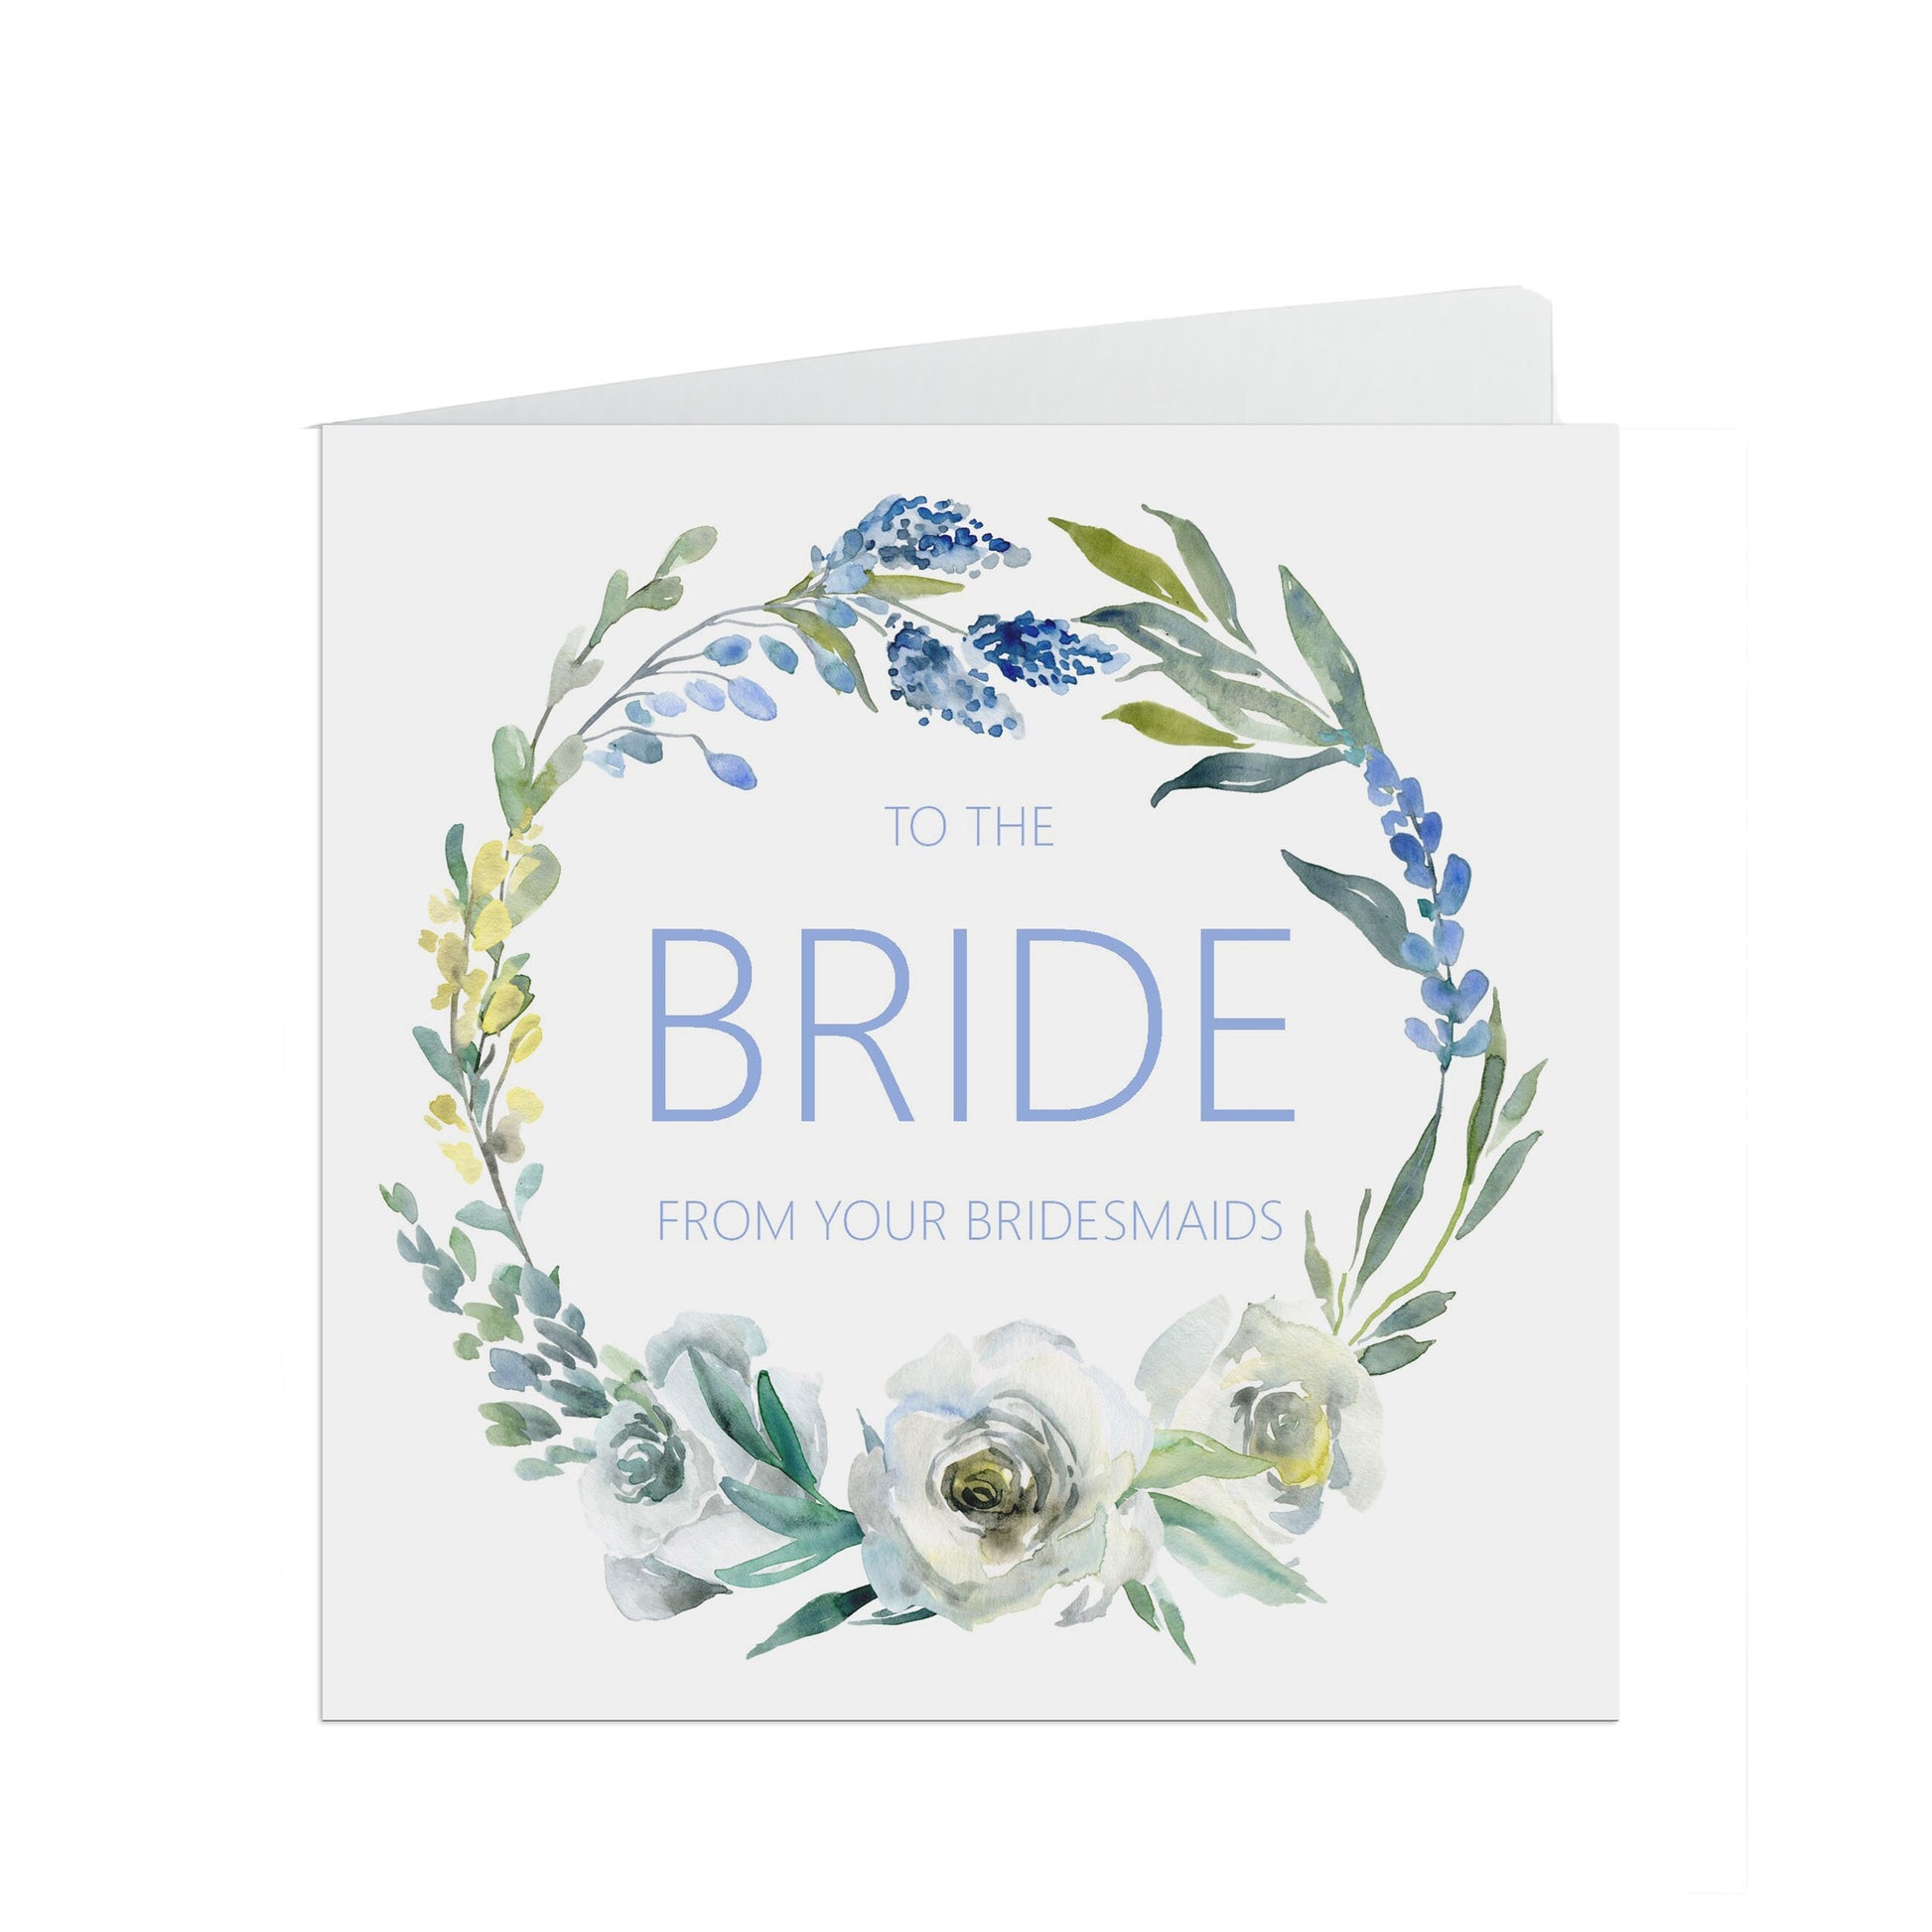 Bride From Your Bridesmaids Wedding Card - Blue Floral